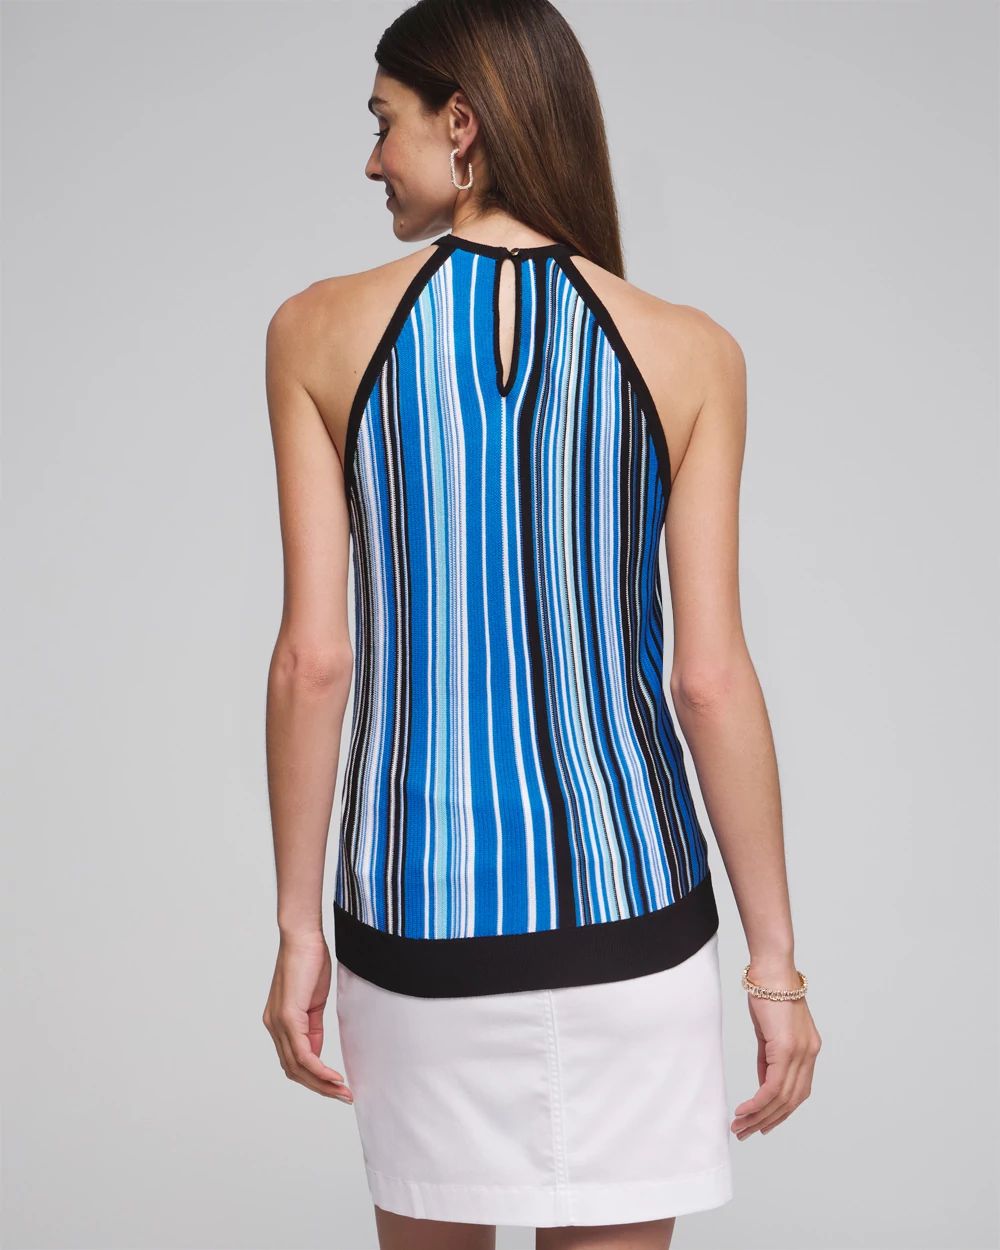 Outlet WHBM Sleeveless Striped Halter Top